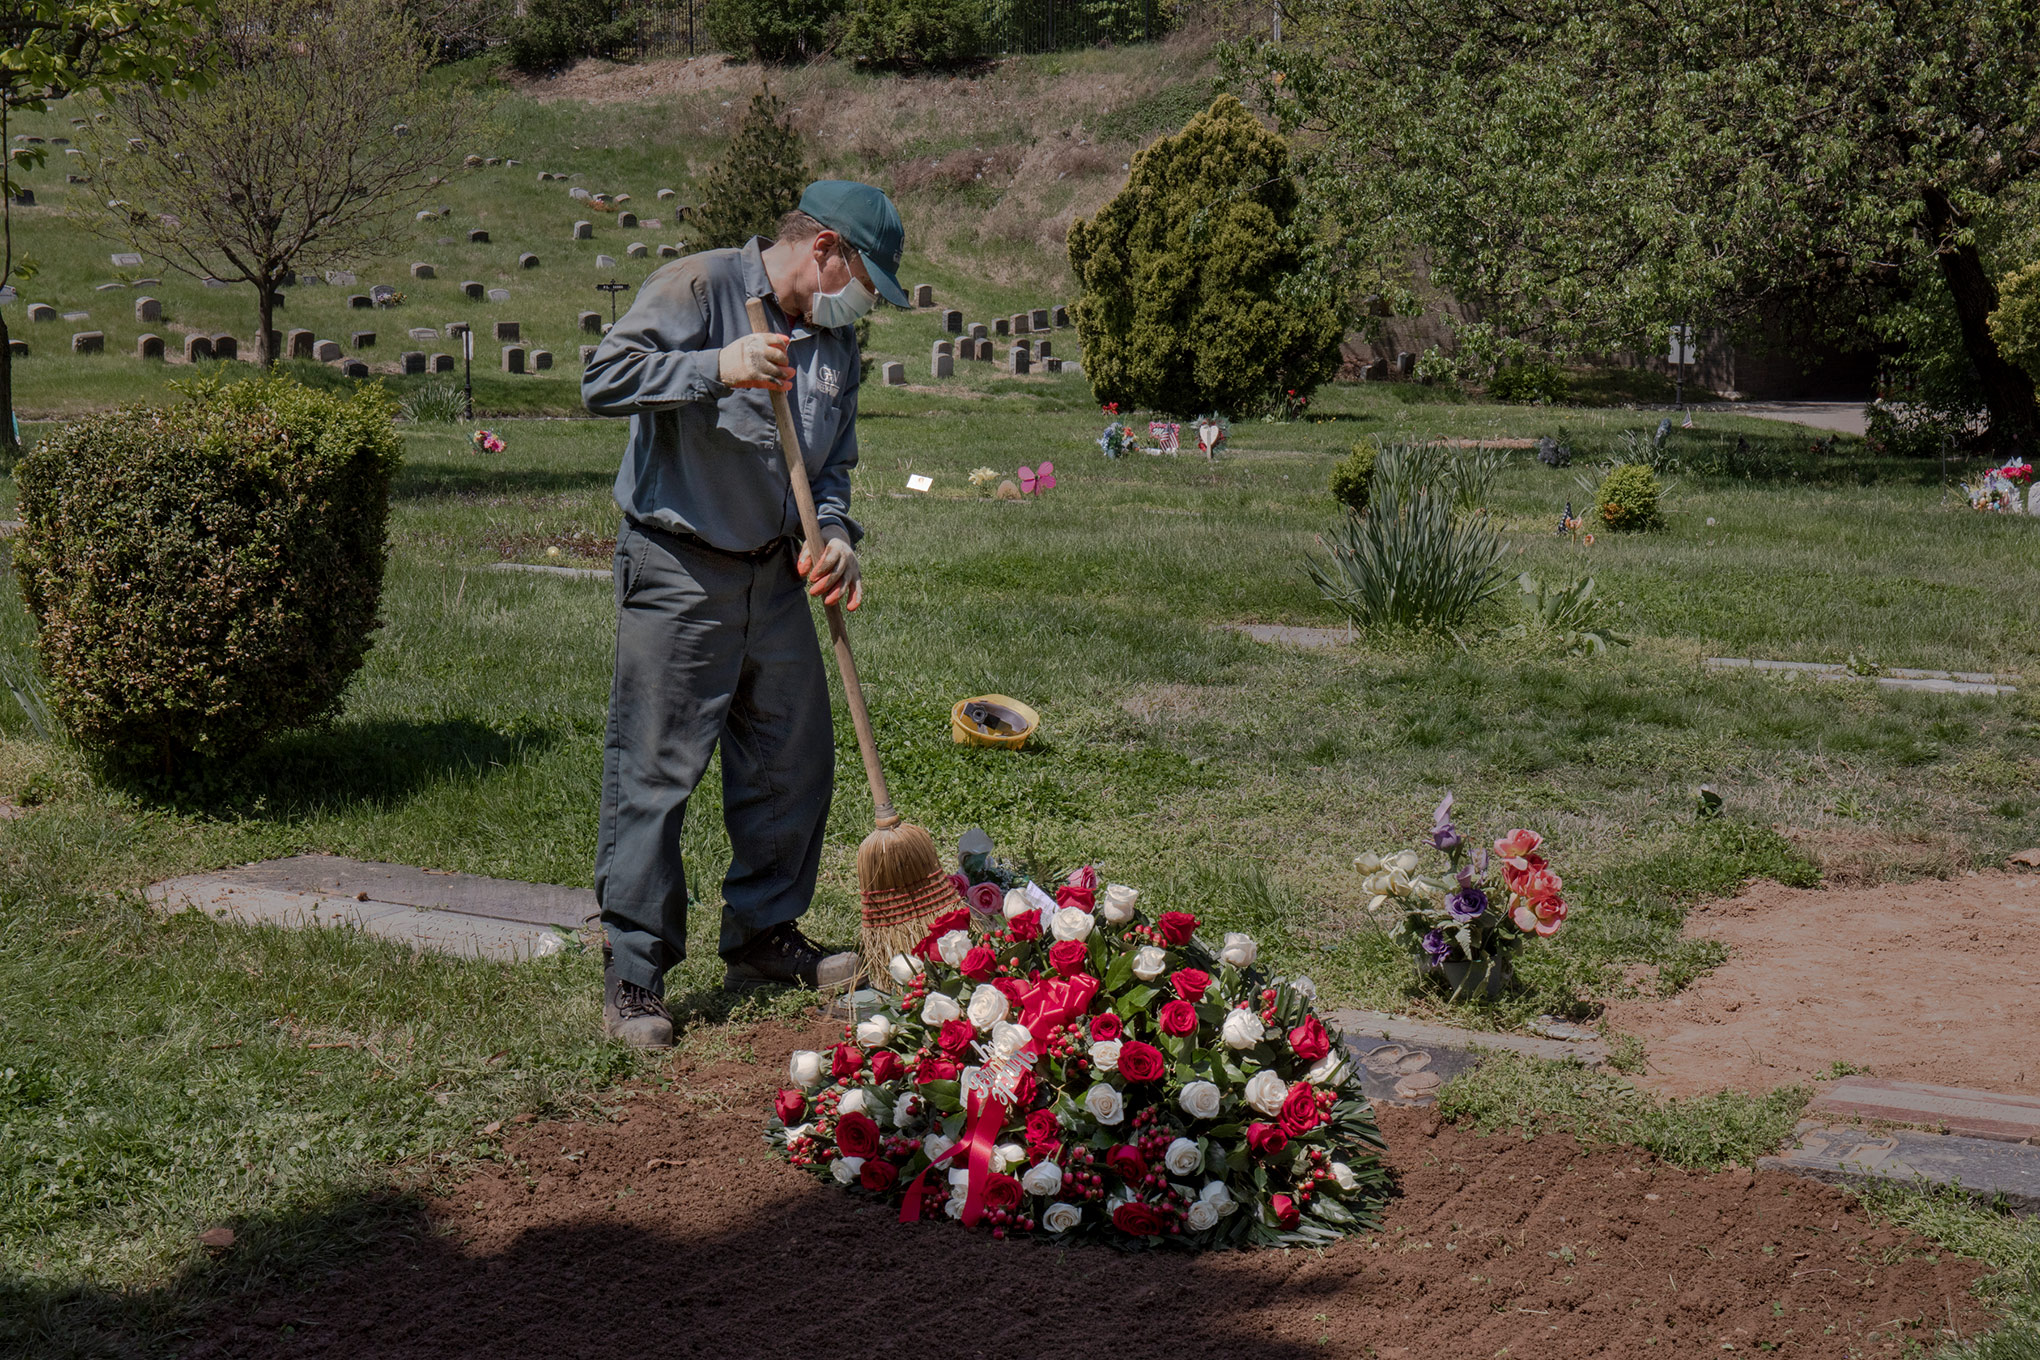 Social distancing regulations have made funerals lonely and rare. On May 4, Janusz Karkos tends the grave of a COVID-19 victim at Brooklyn's Green-Wood Cemetery. (Natalie Keyssar for TIME)